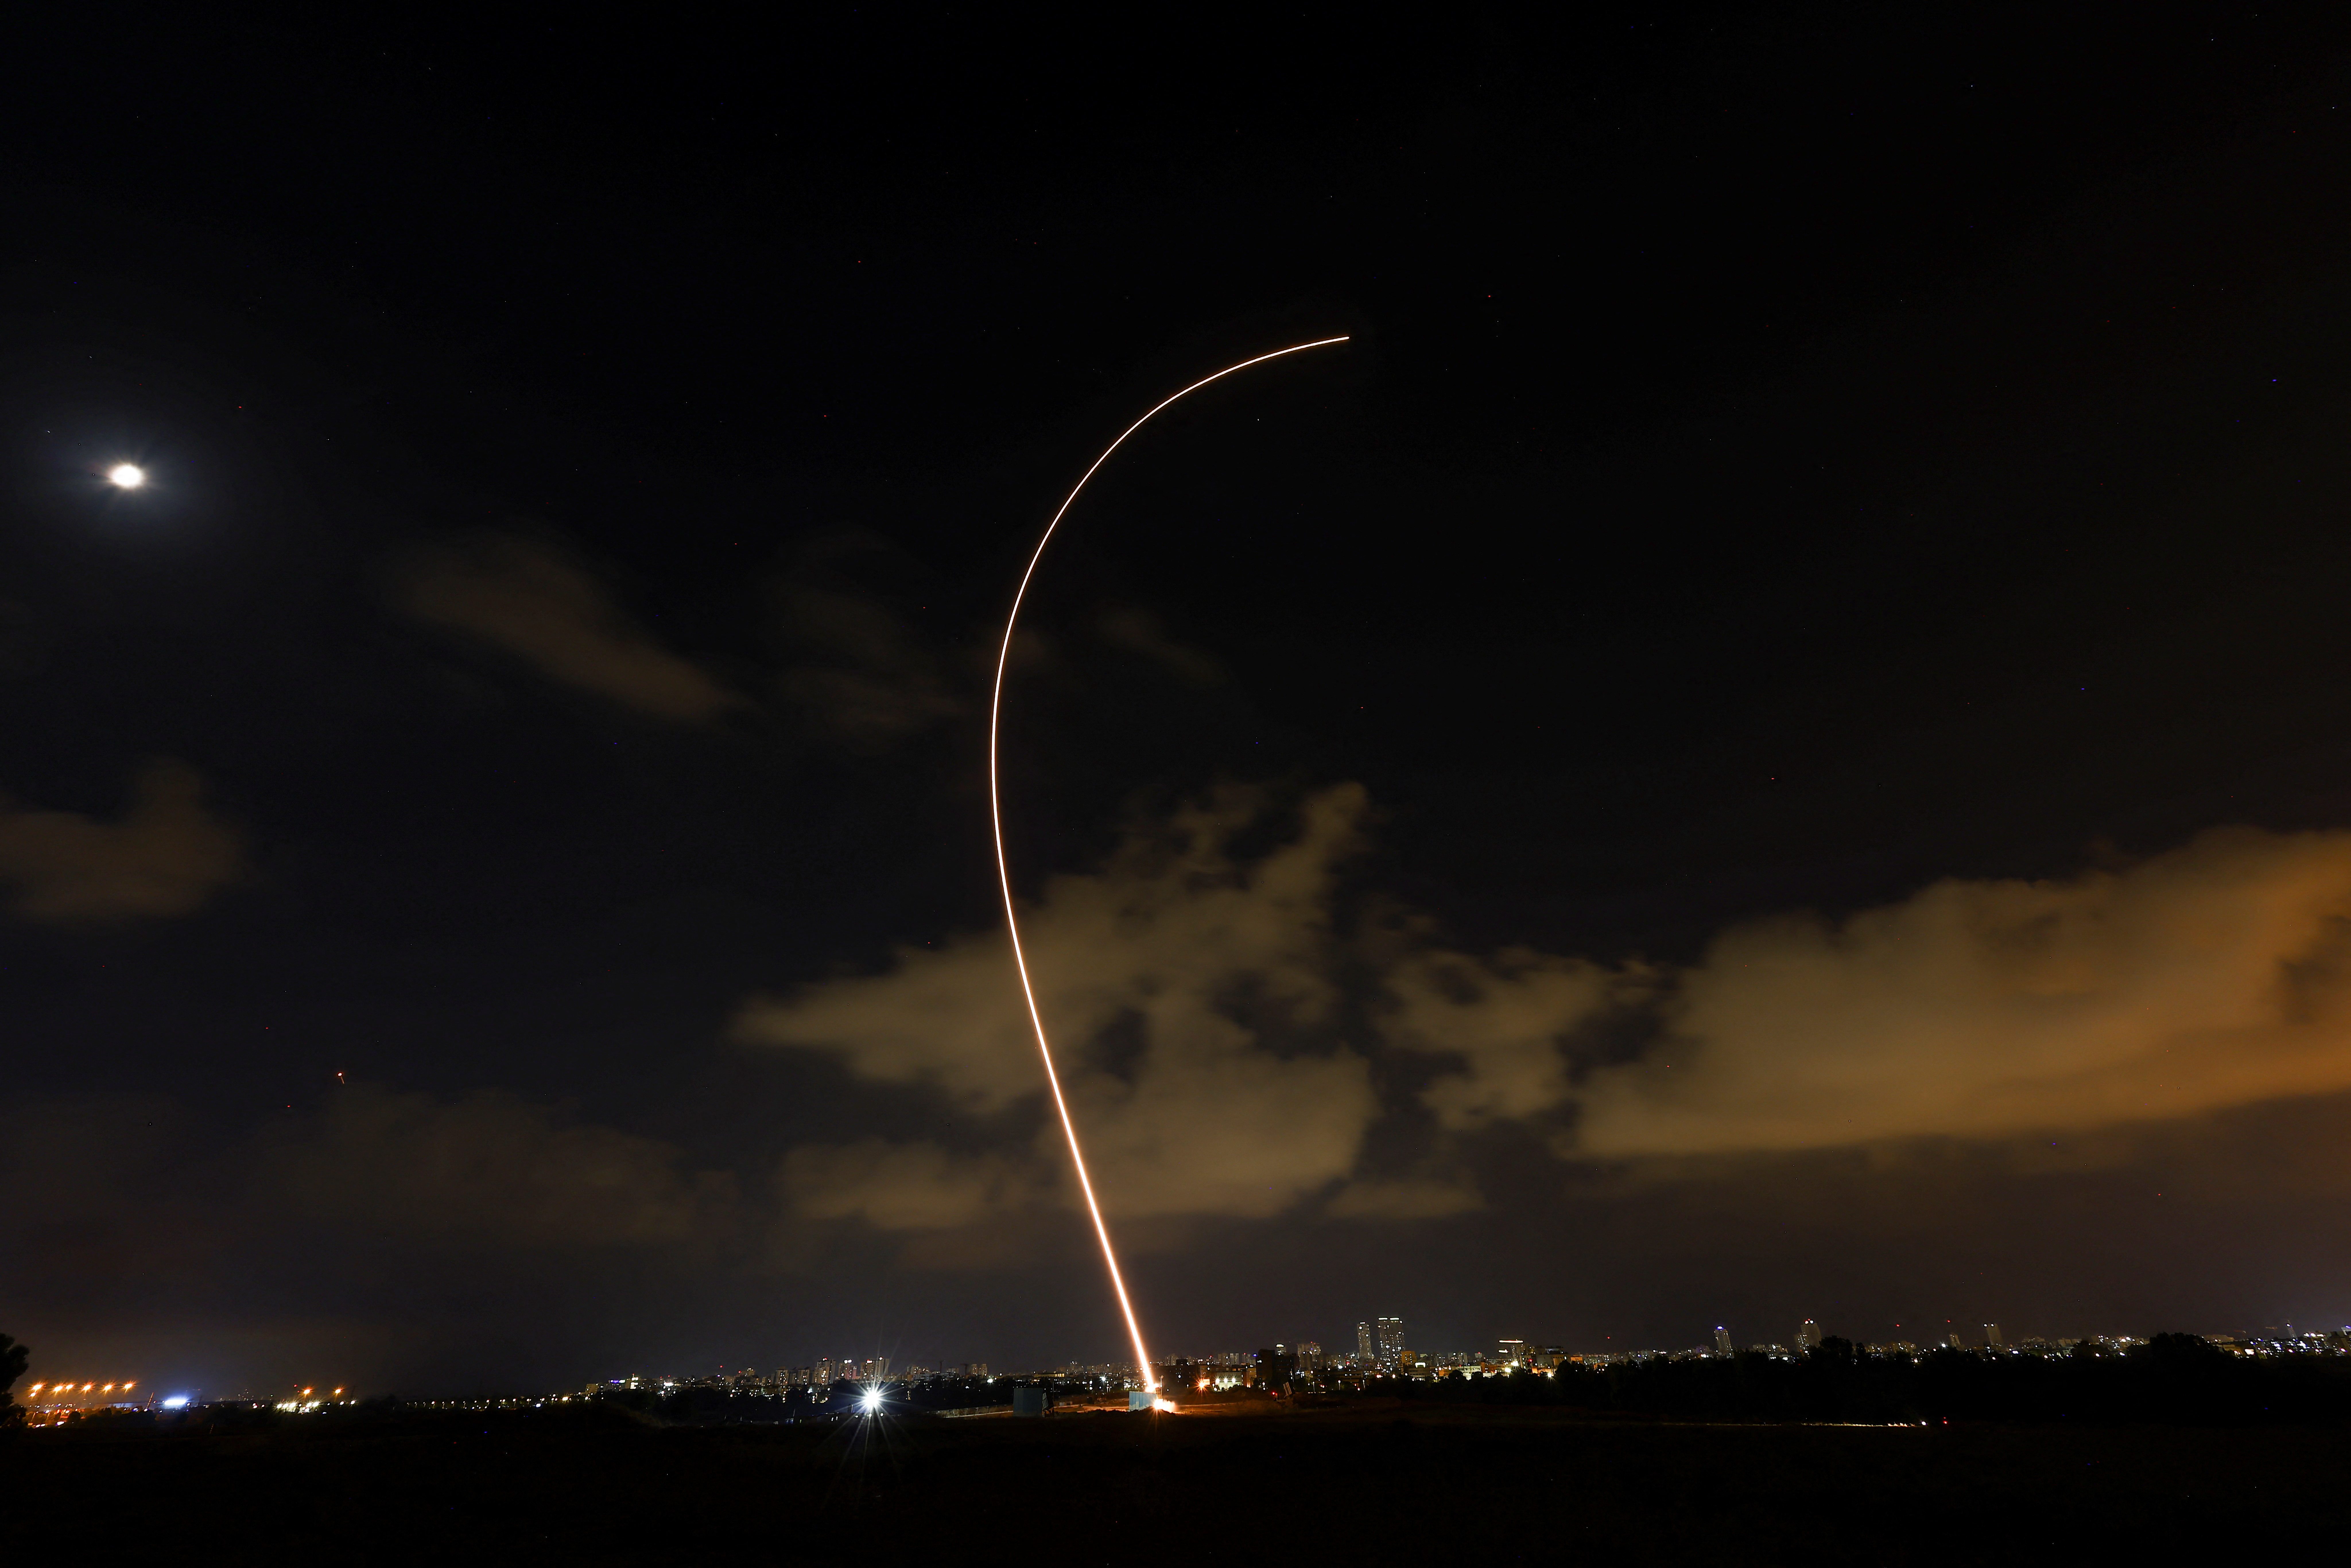 Israel's Iron Dome anti-missile system fires to intercept a rocket launched from the Gaza Strip towards Israel near Ashdod, Israel